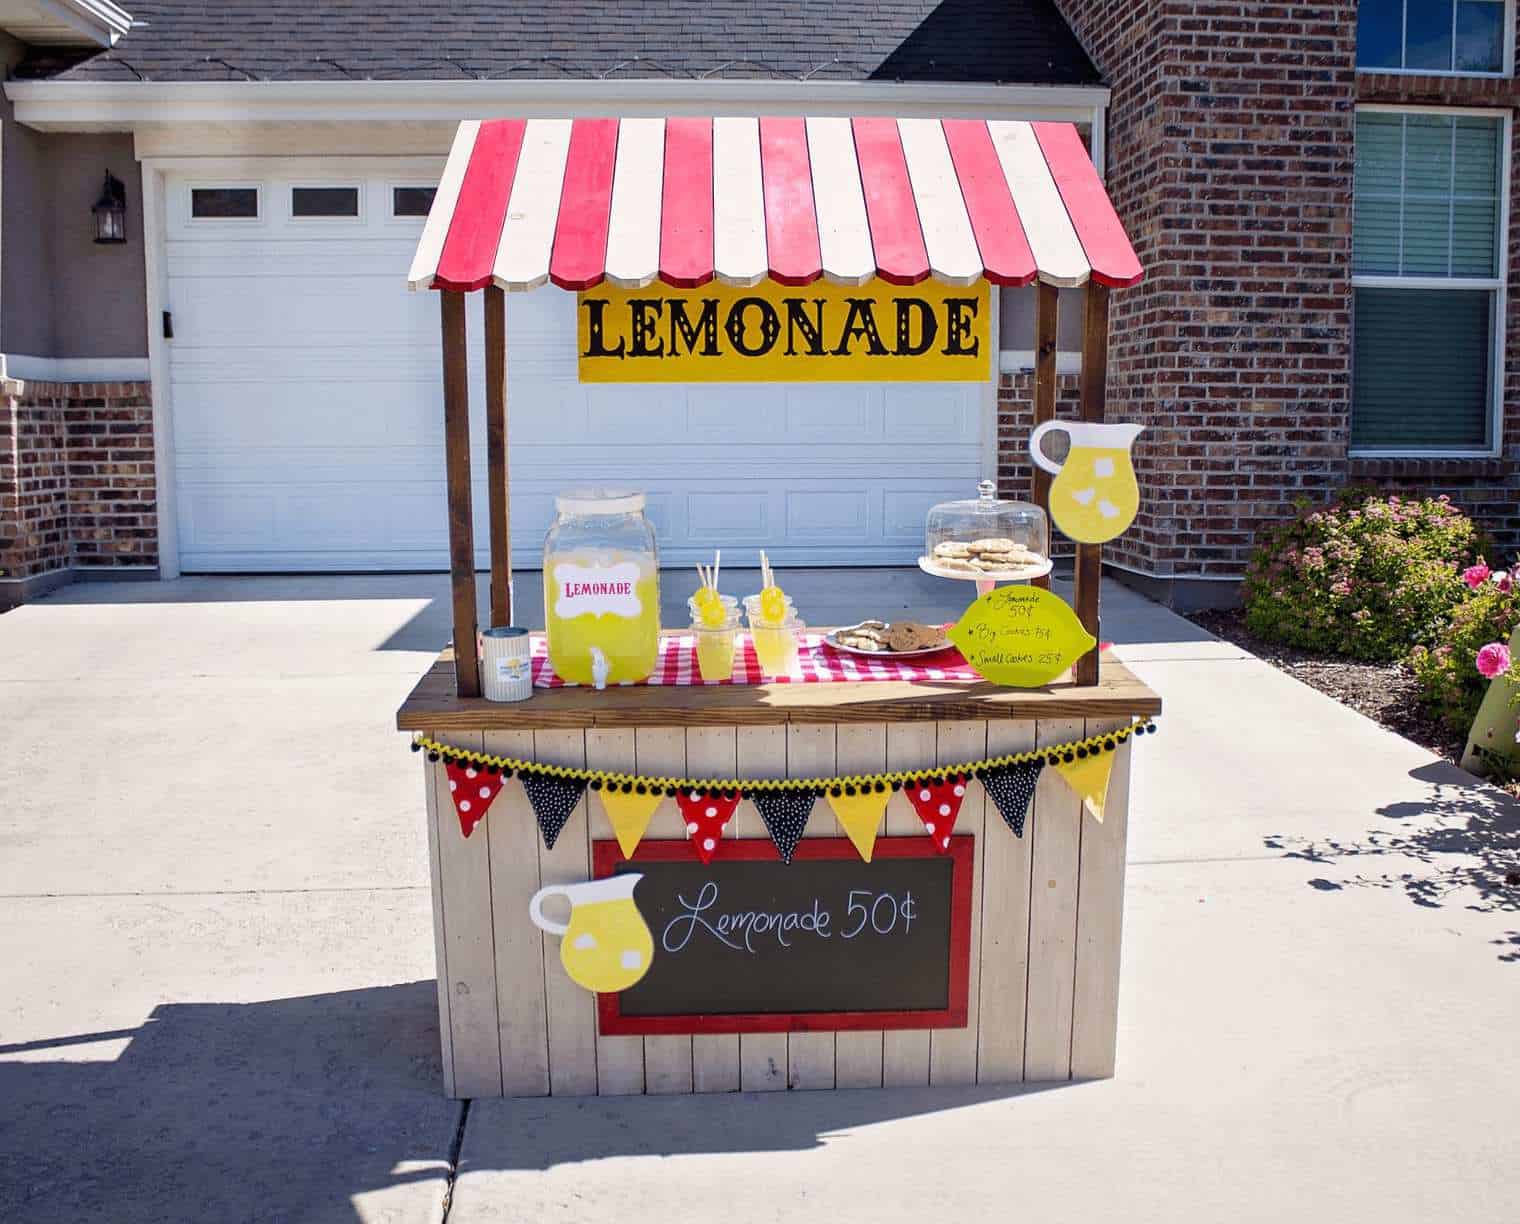 Company insurance is intended to safeguard the financial assets of a business owner and is a vital investment for a lemonade stand.